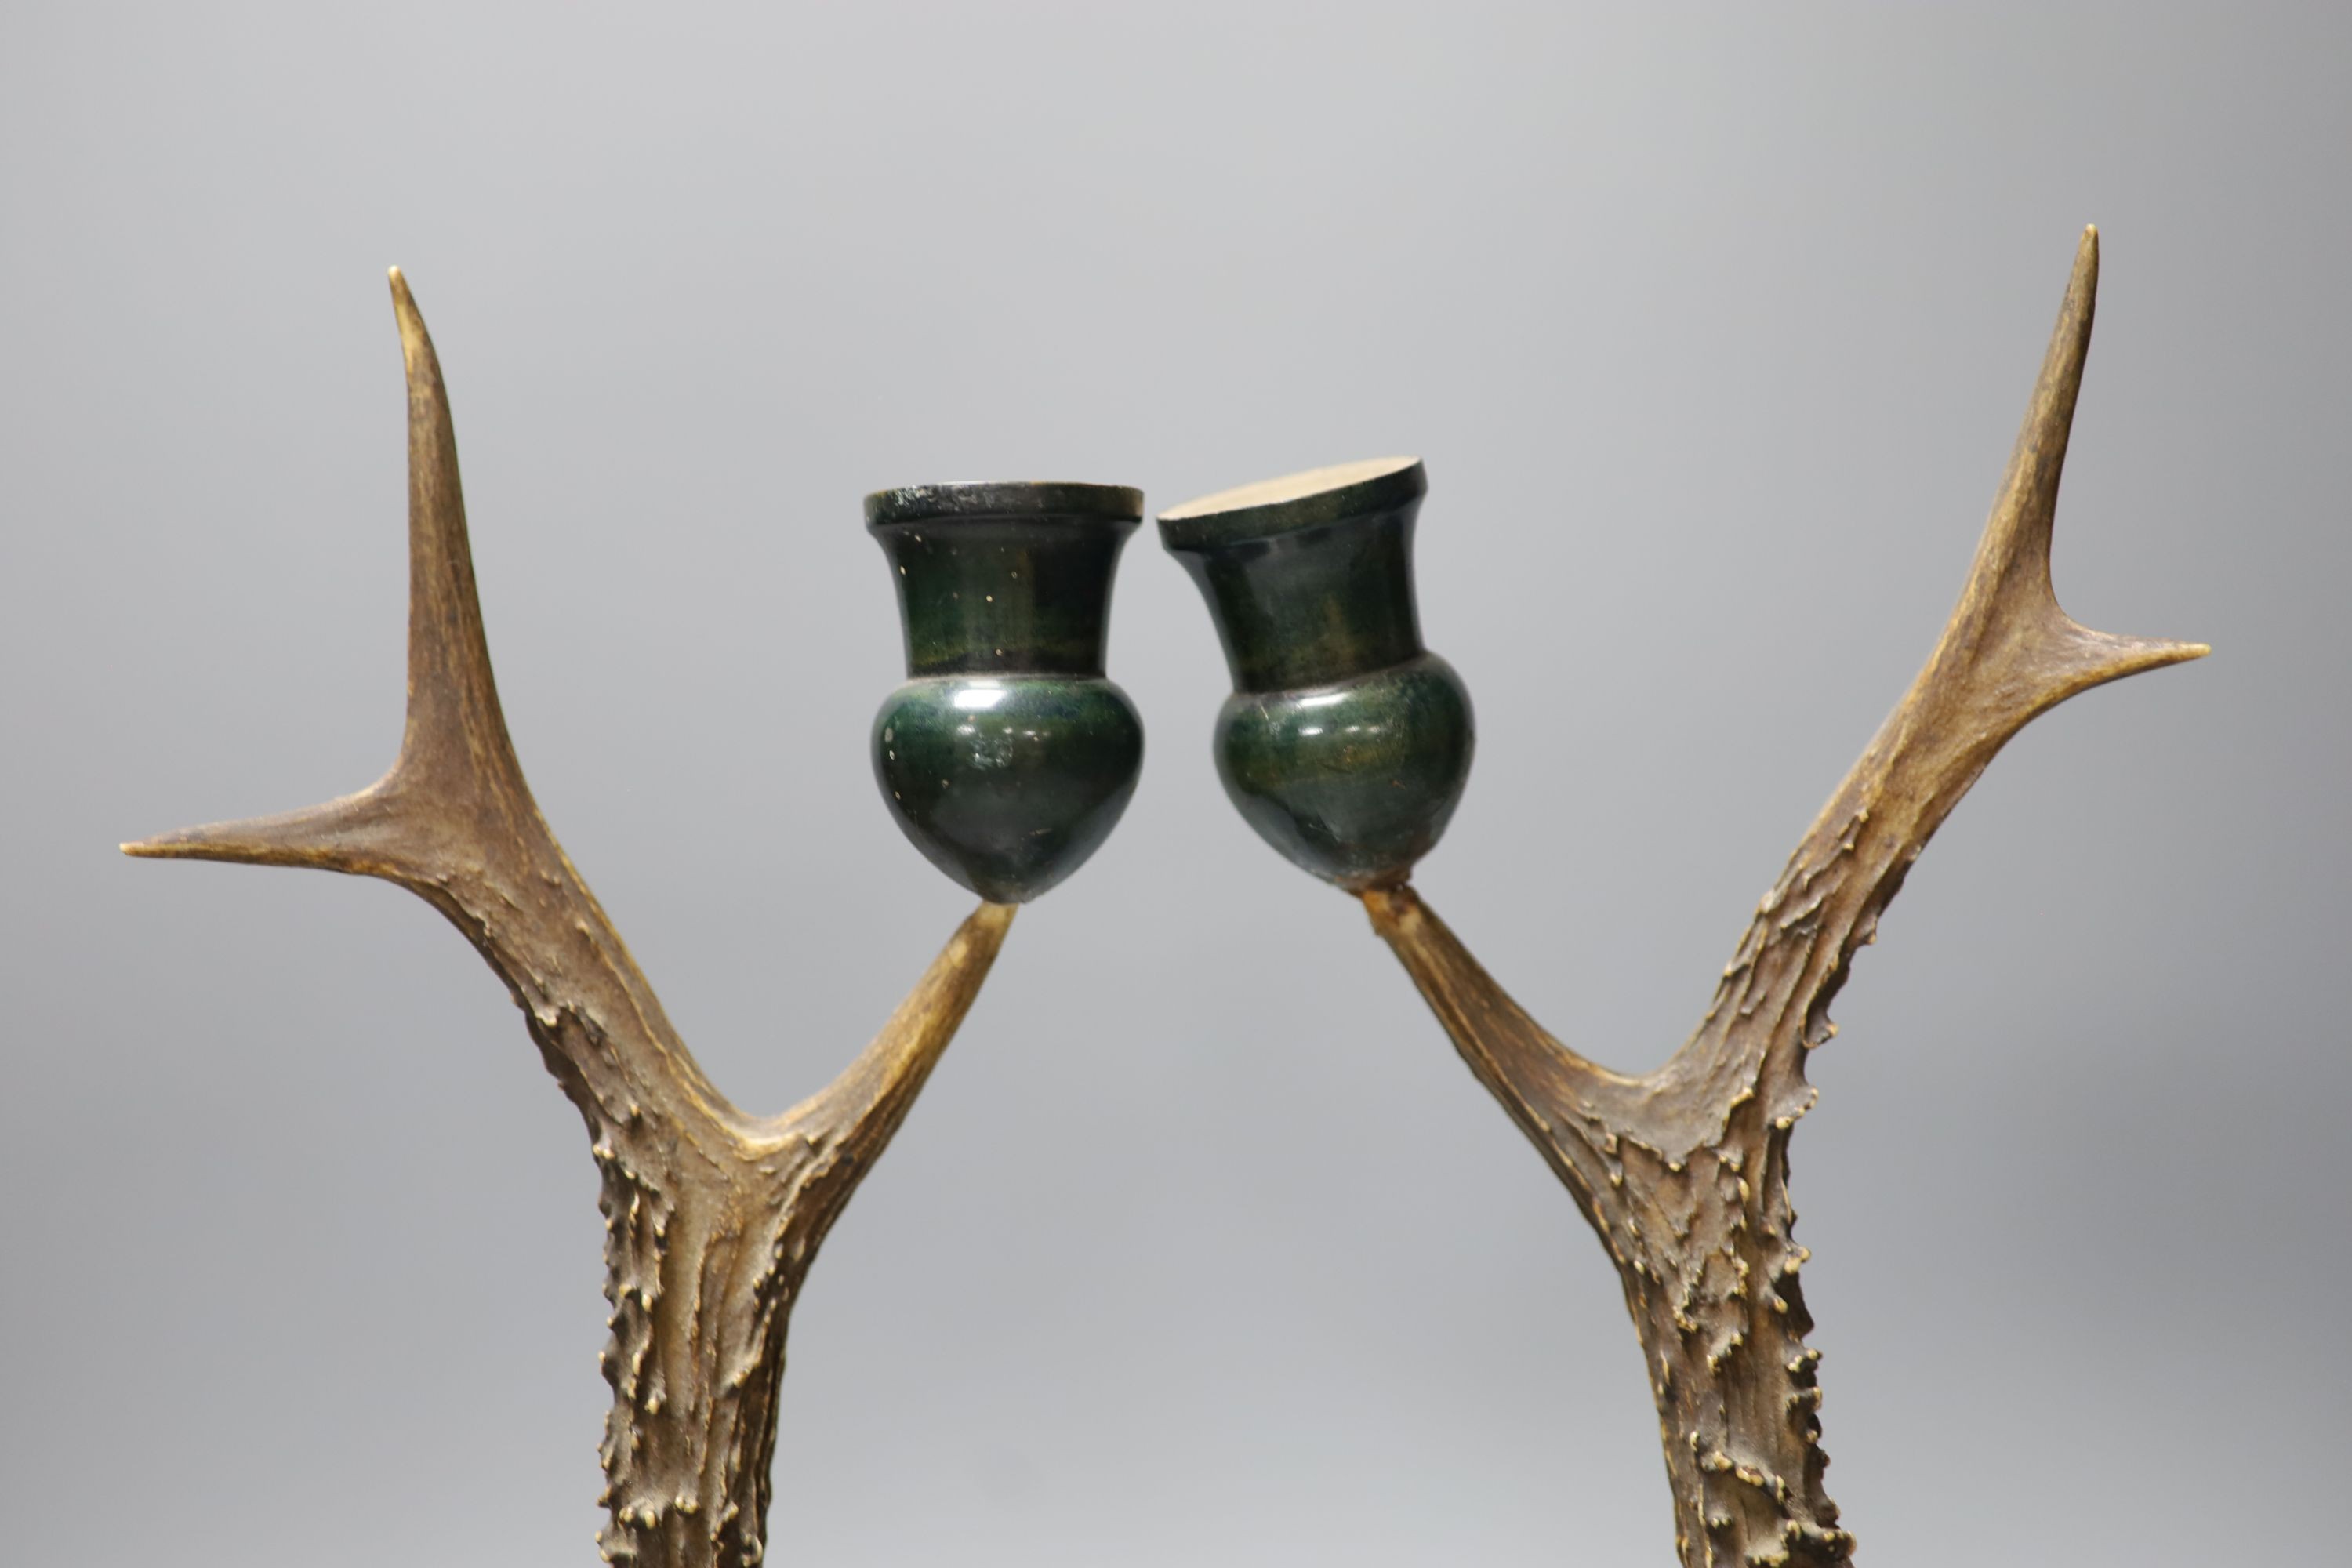 A pair of late 19th/early 20th century antler candlesticks, 34.5cm